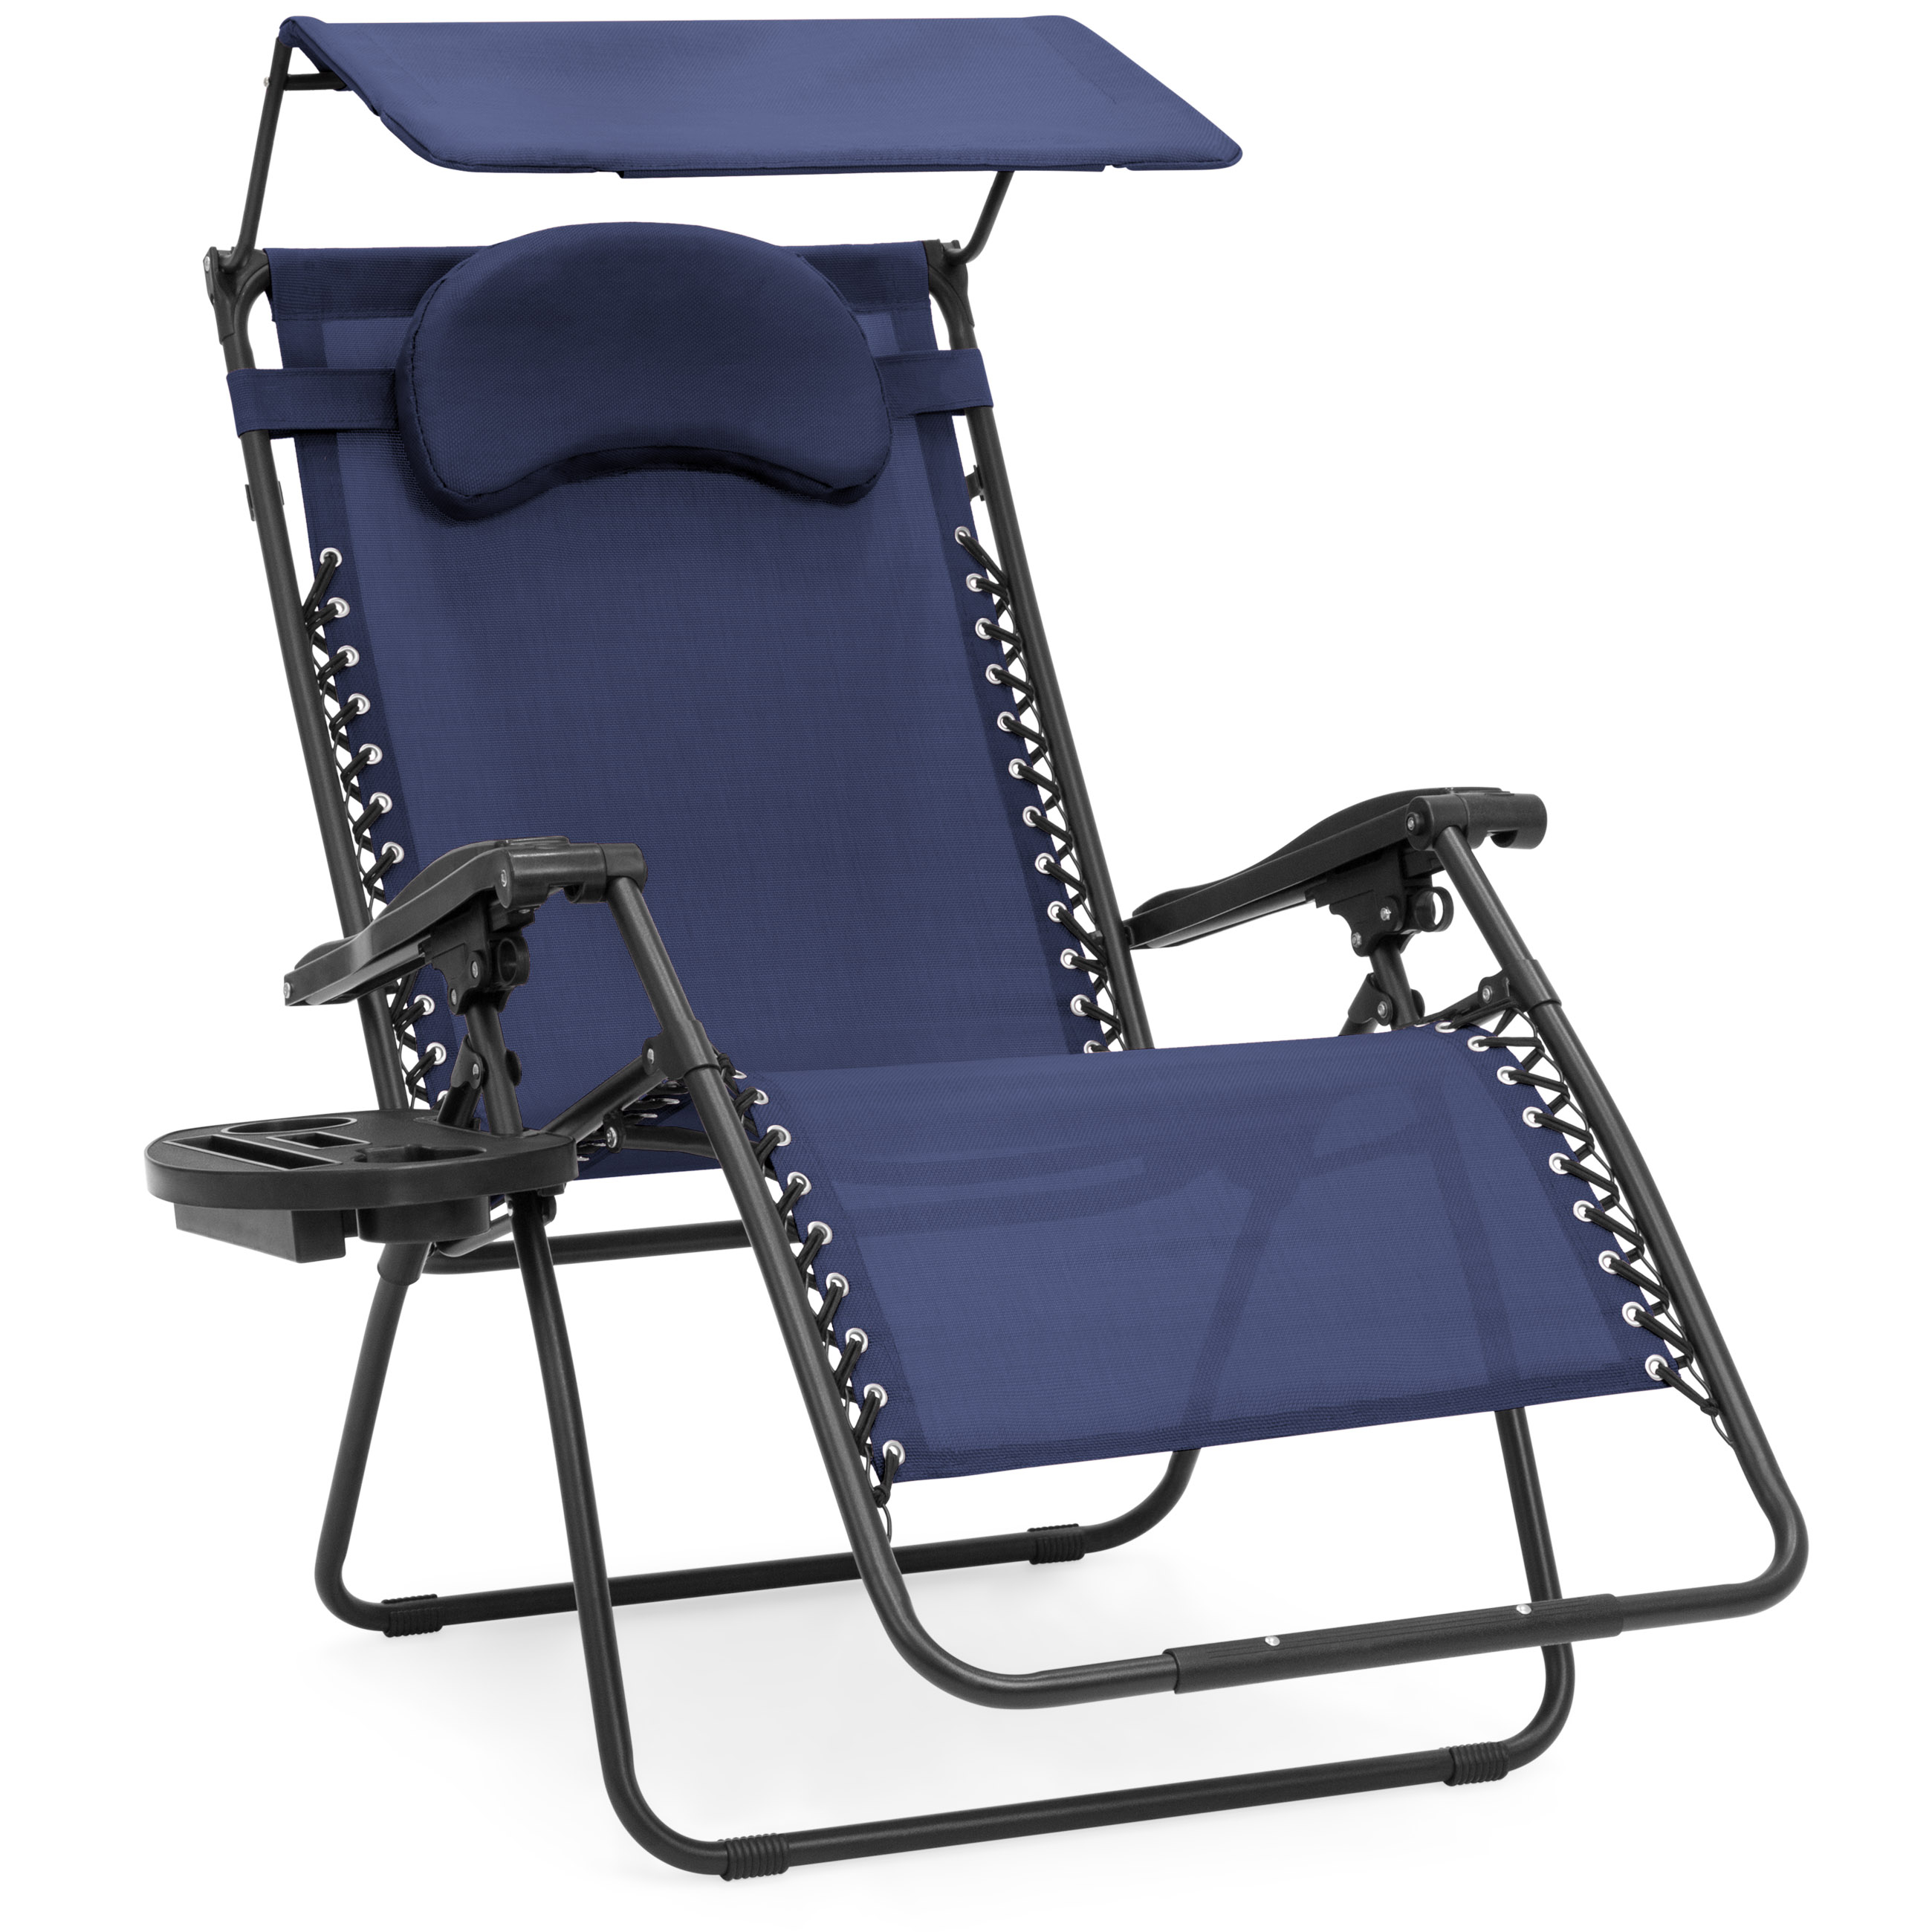 Details About Best Choice Products Oversized Zero Gravity Reclining Lounge Patio Chairs W in size 2600 X 2600